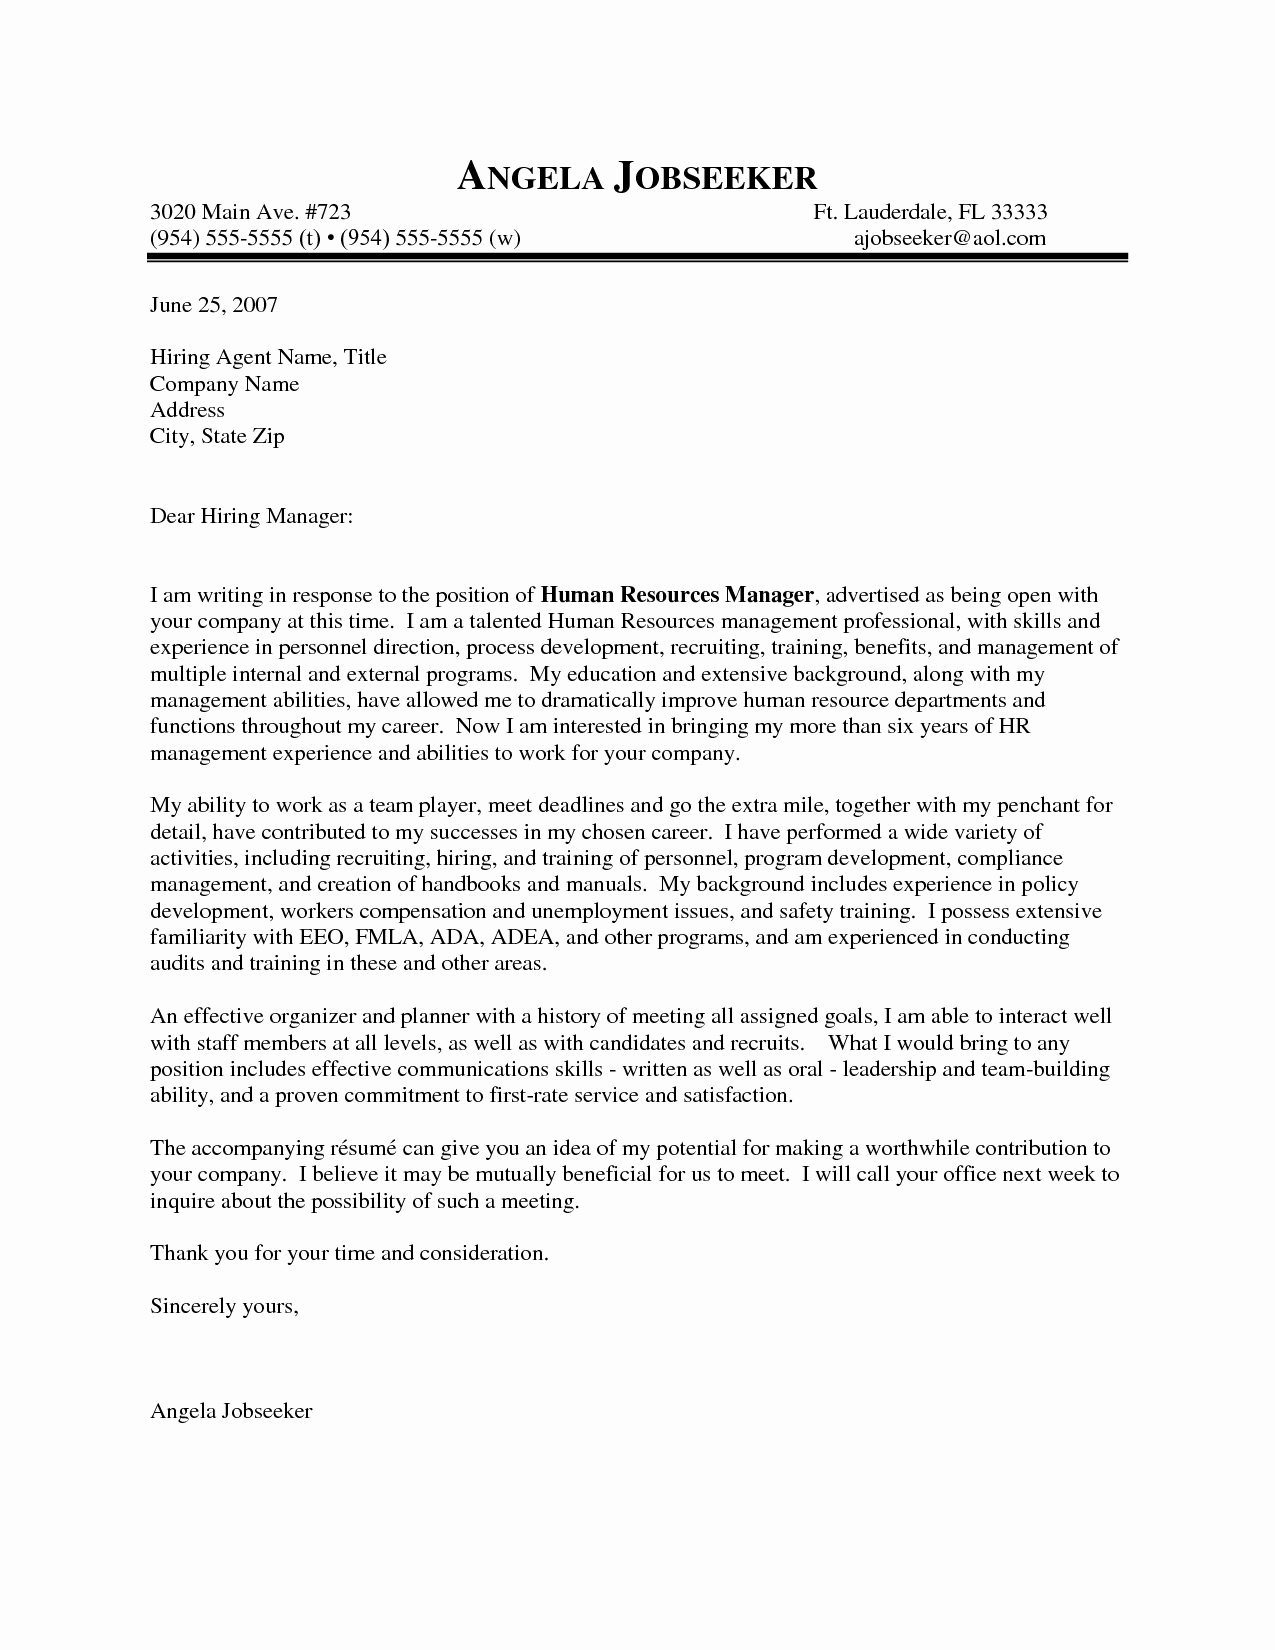 Sample Job Cover Letter Awesome Outstanding Cover Letter Examples